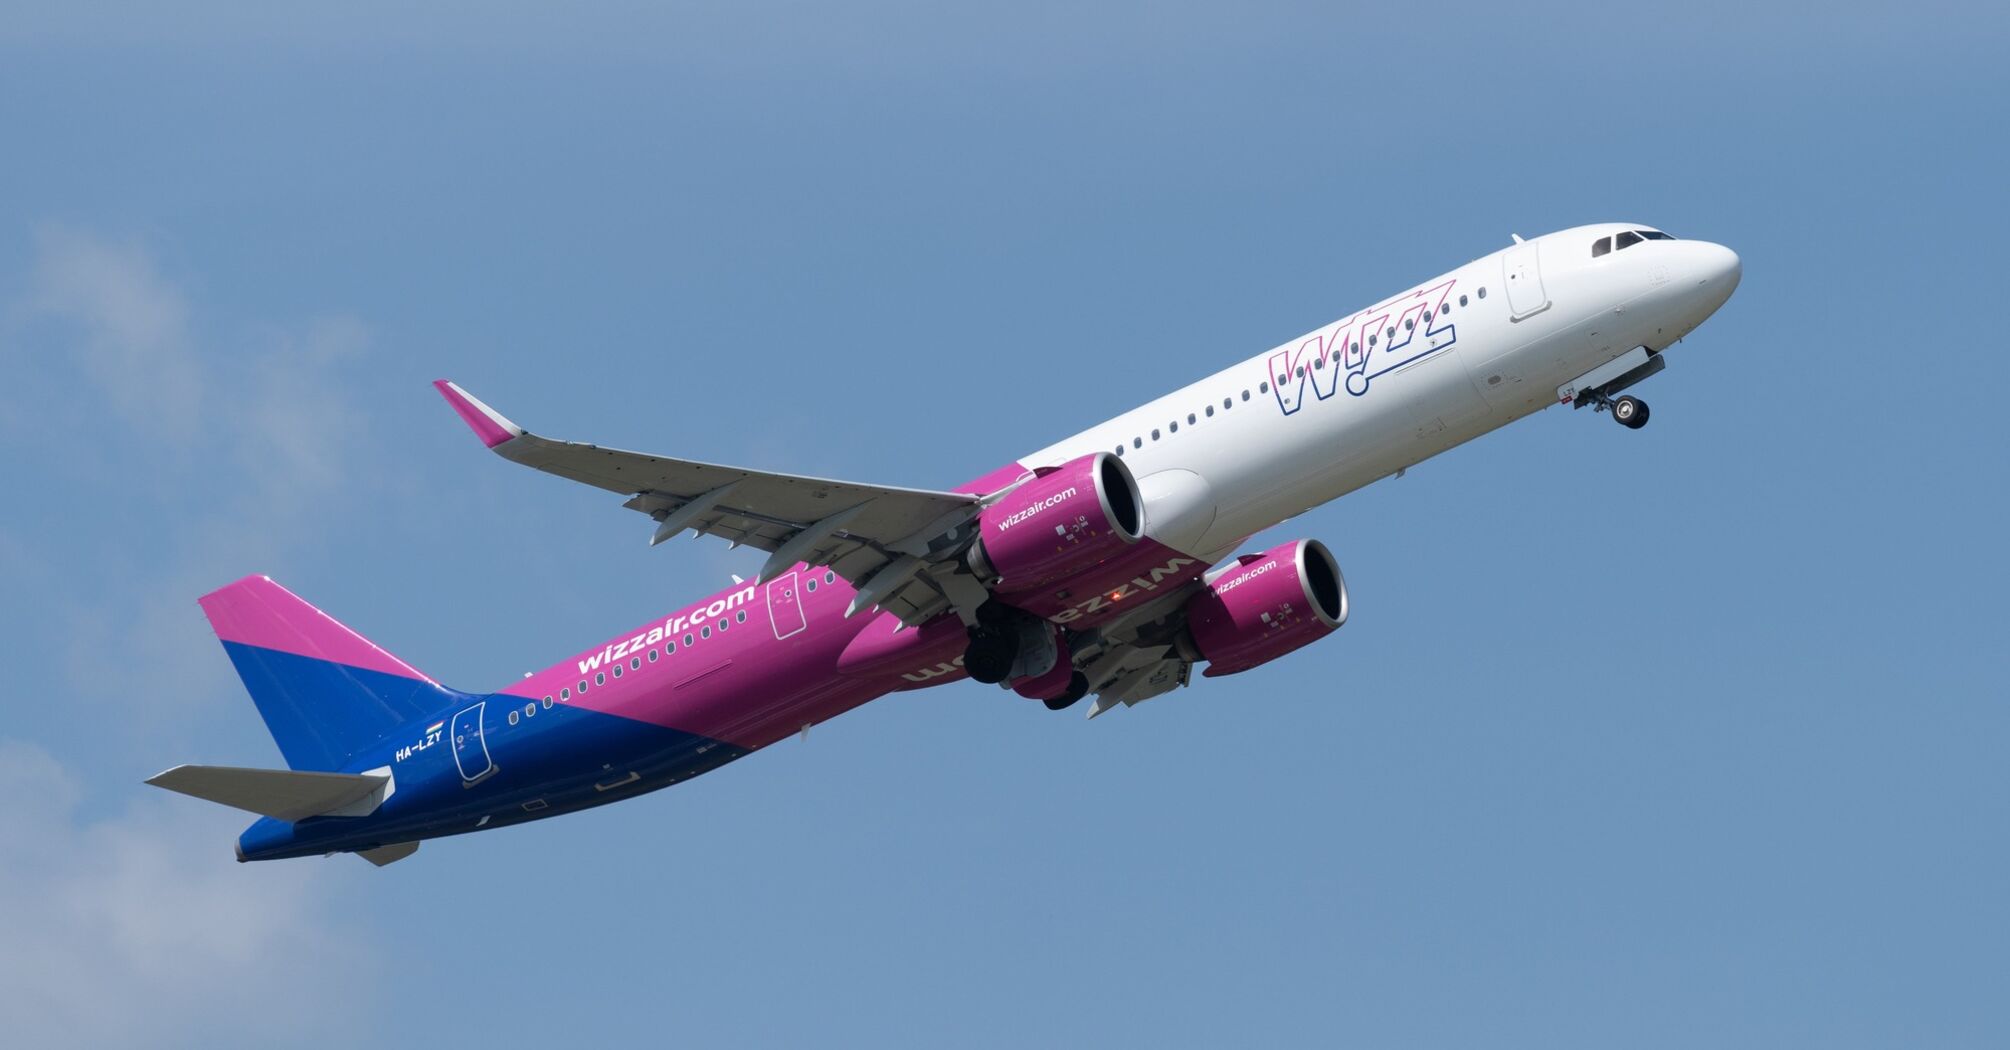 Wizz Air announced the introduction of an additional flight to Cologne